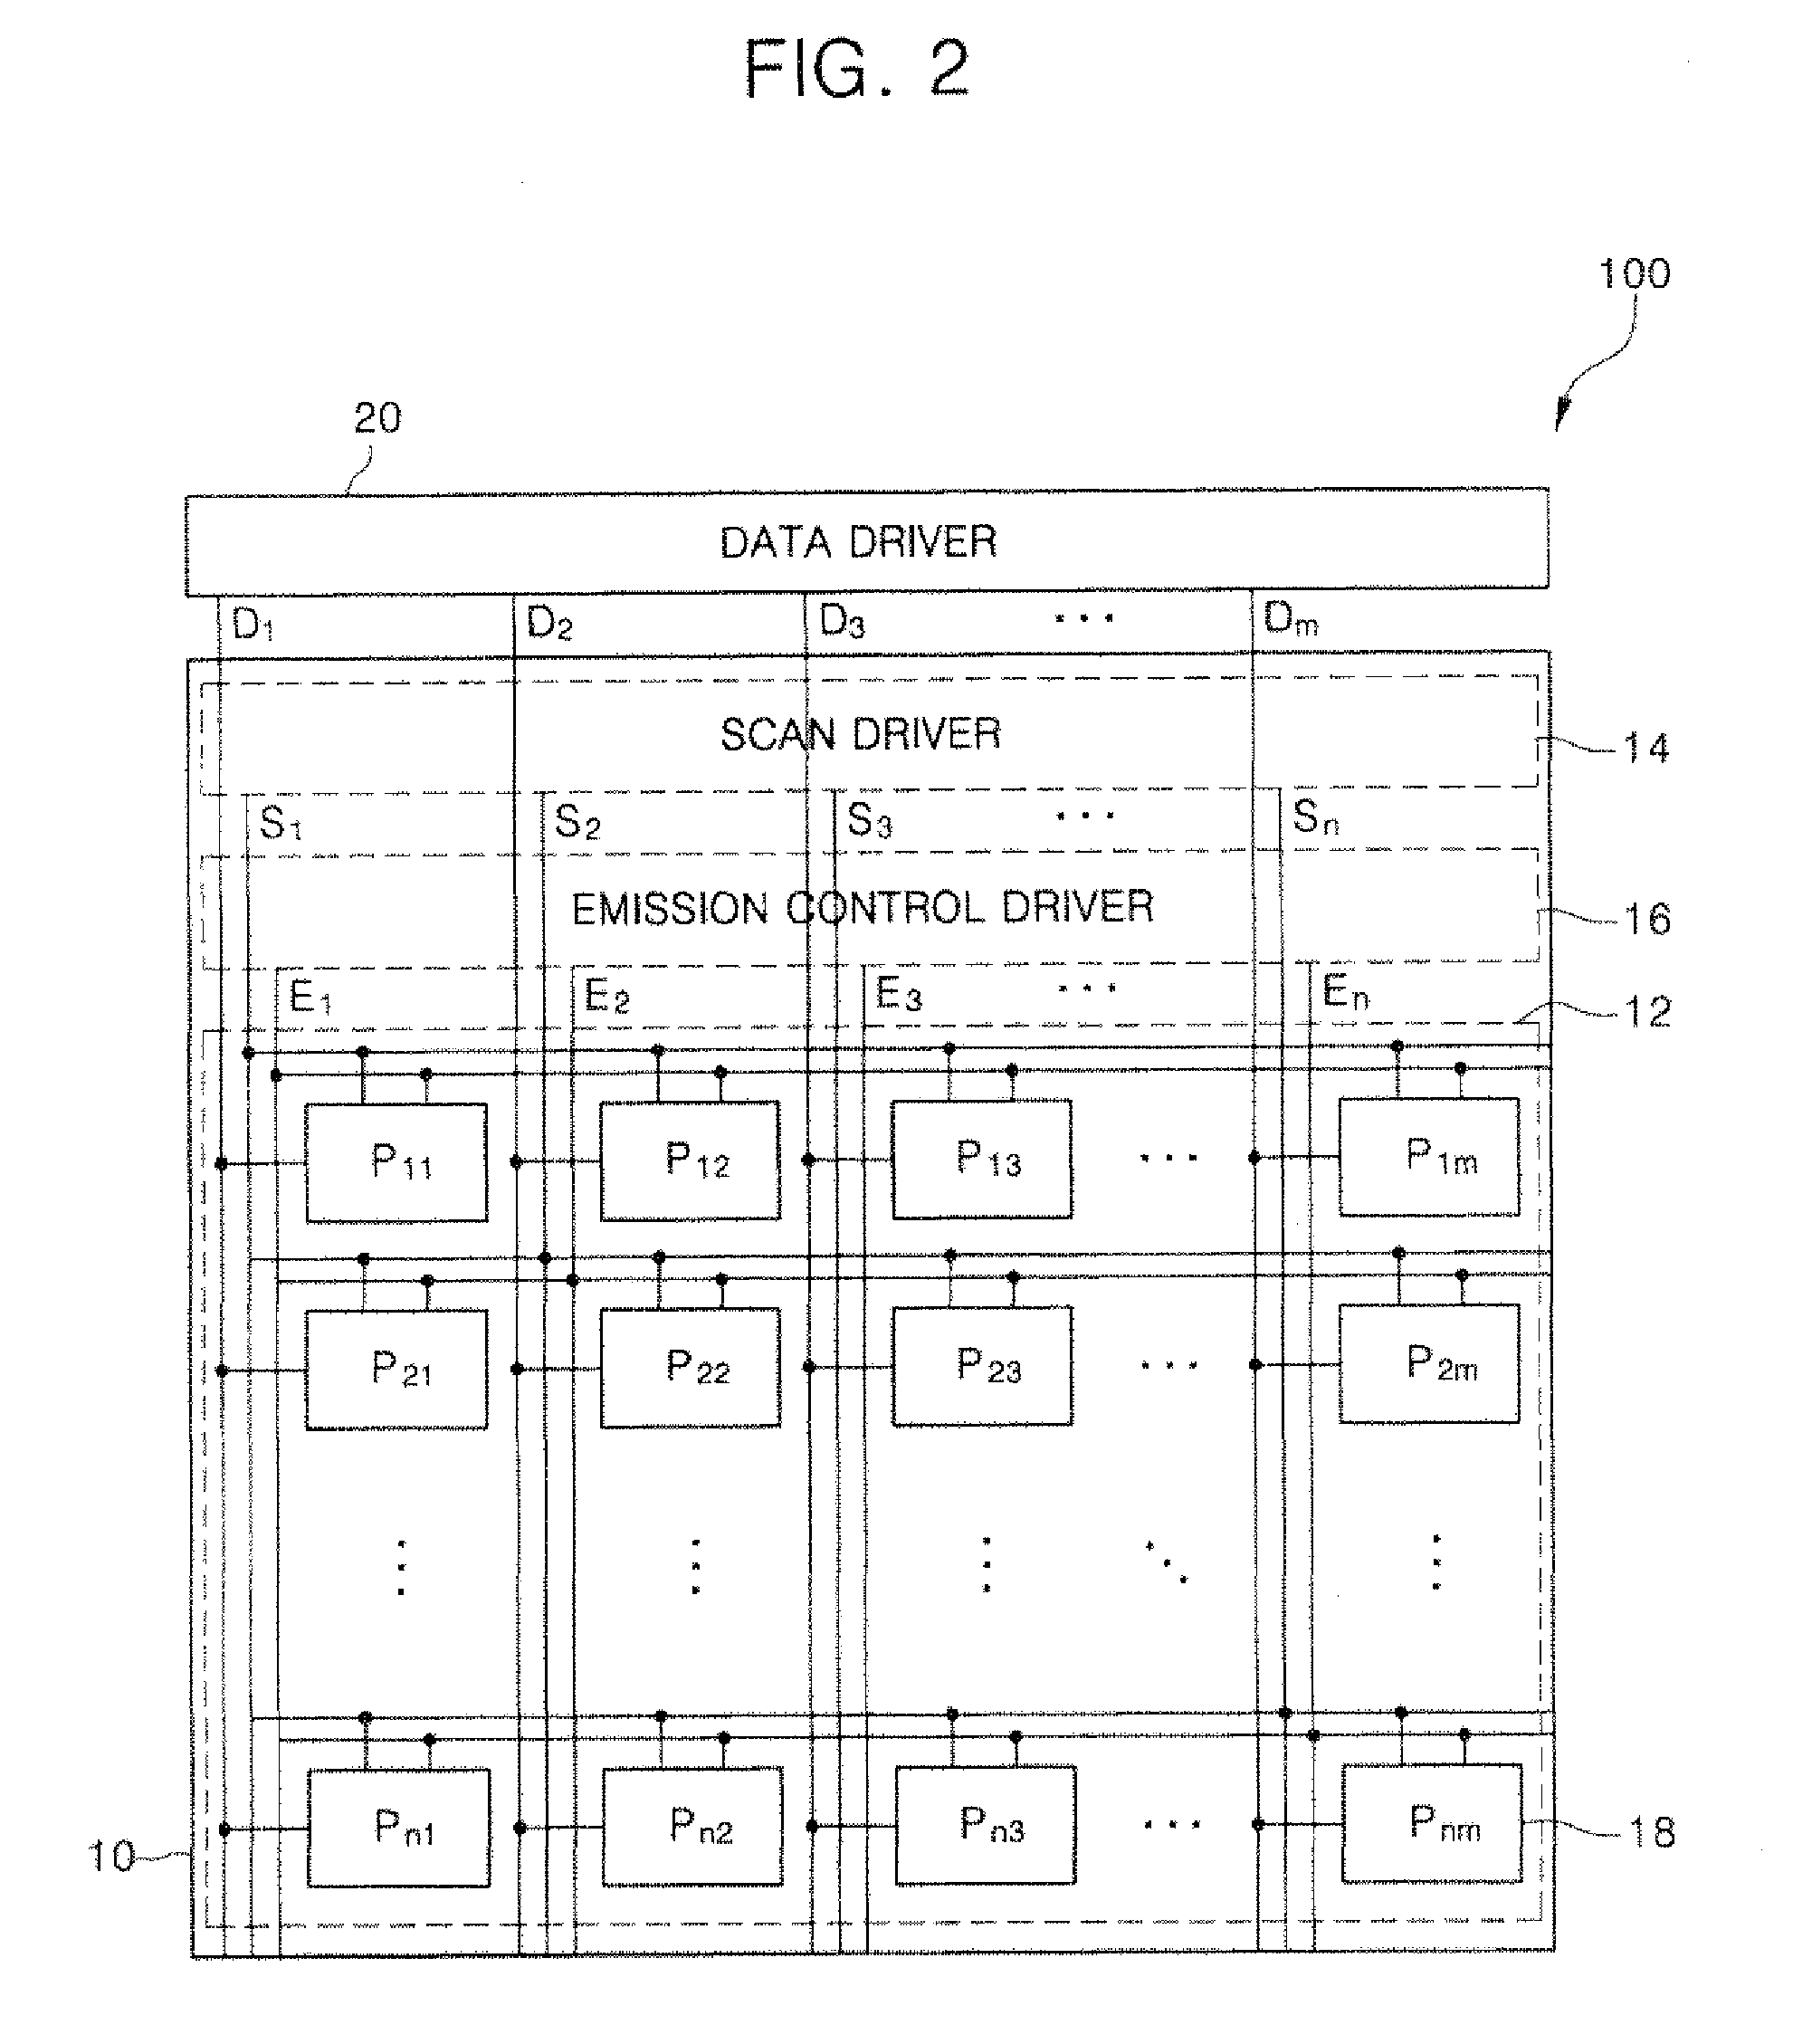 Emission control driver and organic light emitting display device having the same and a logical or circuit for an emission control driver for outputting an emission control signal